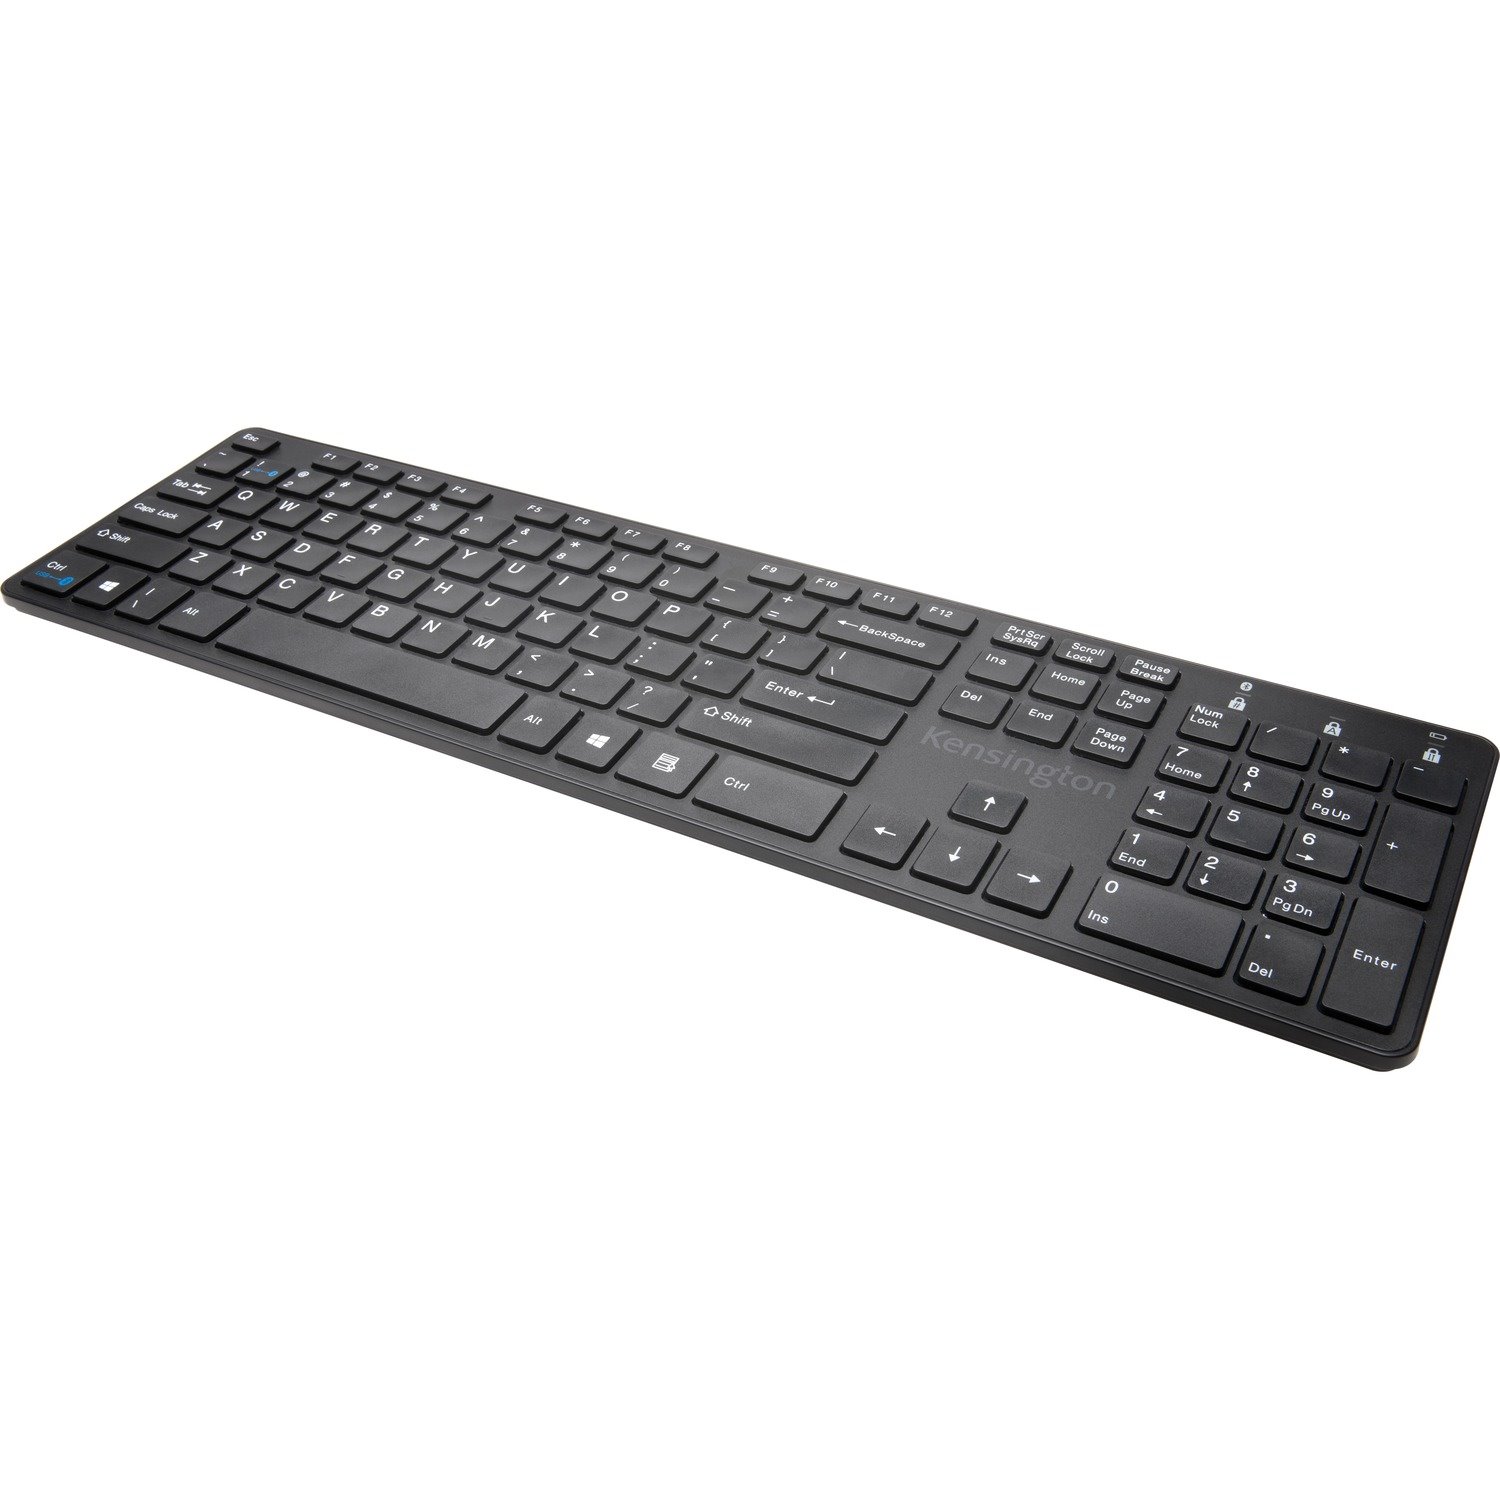 Kensington KP400 Keyboard - Wired/Wireless Connectivity - USB Interface - QWERTY Layout - Black